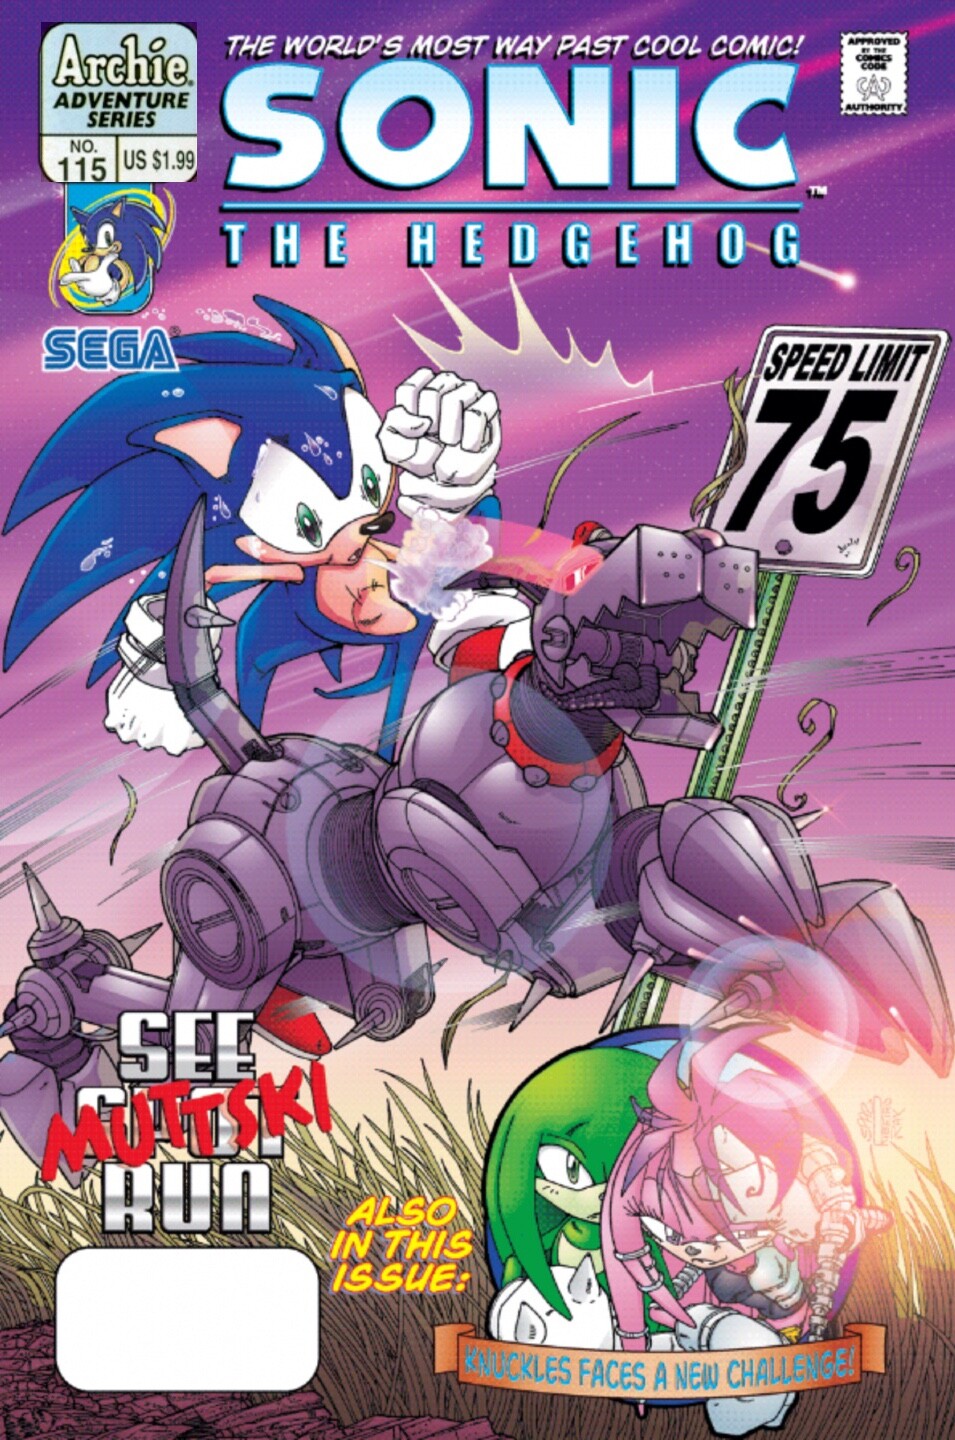 Mighty the Armadillo, Archie Sonic Online Wiki